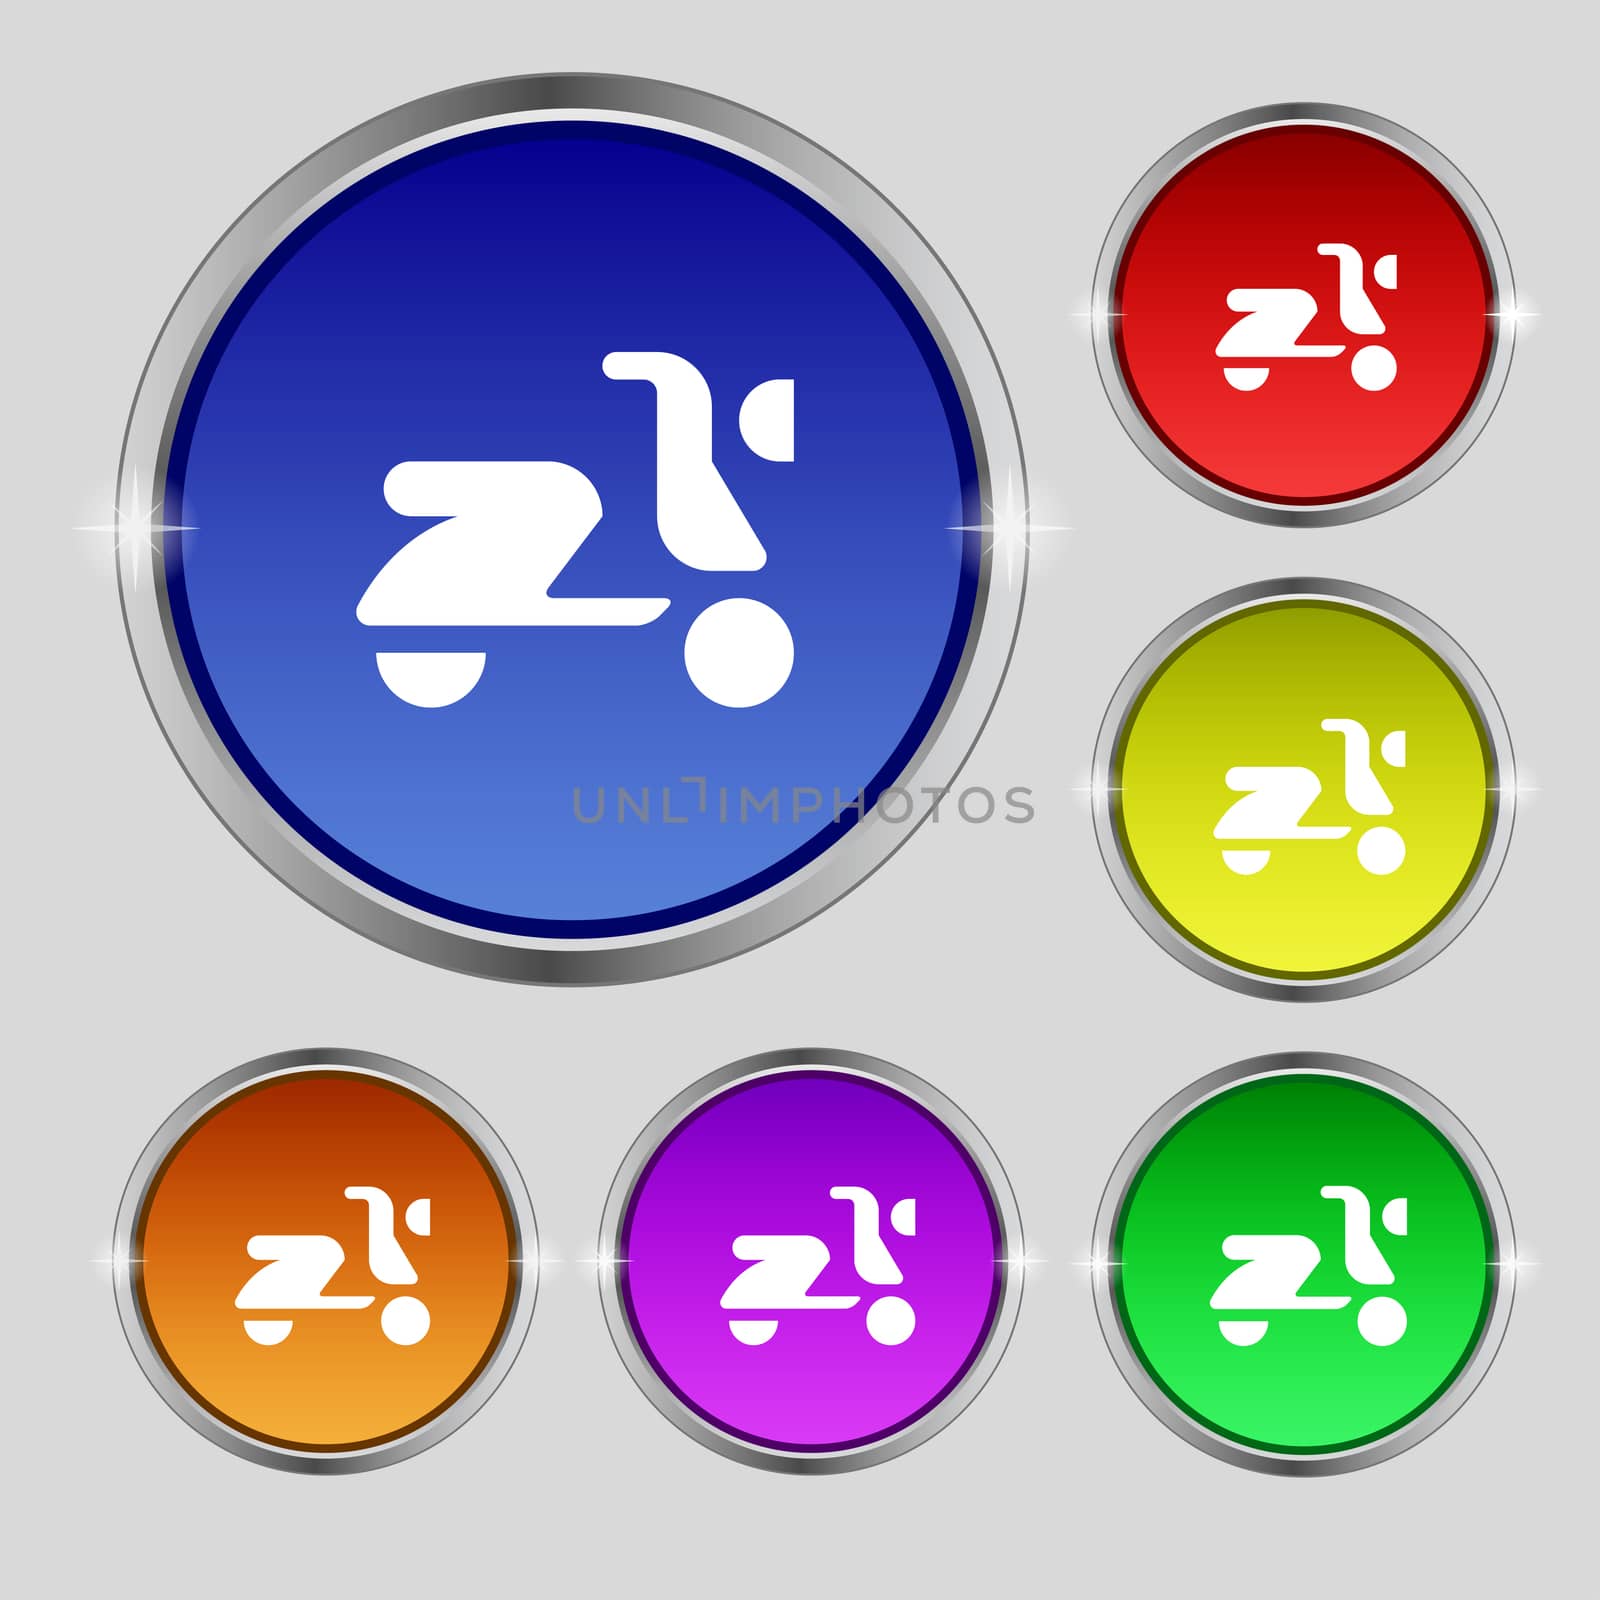 Scooter, bike icon sign. Round symbol on bright colourful buttons. illustration